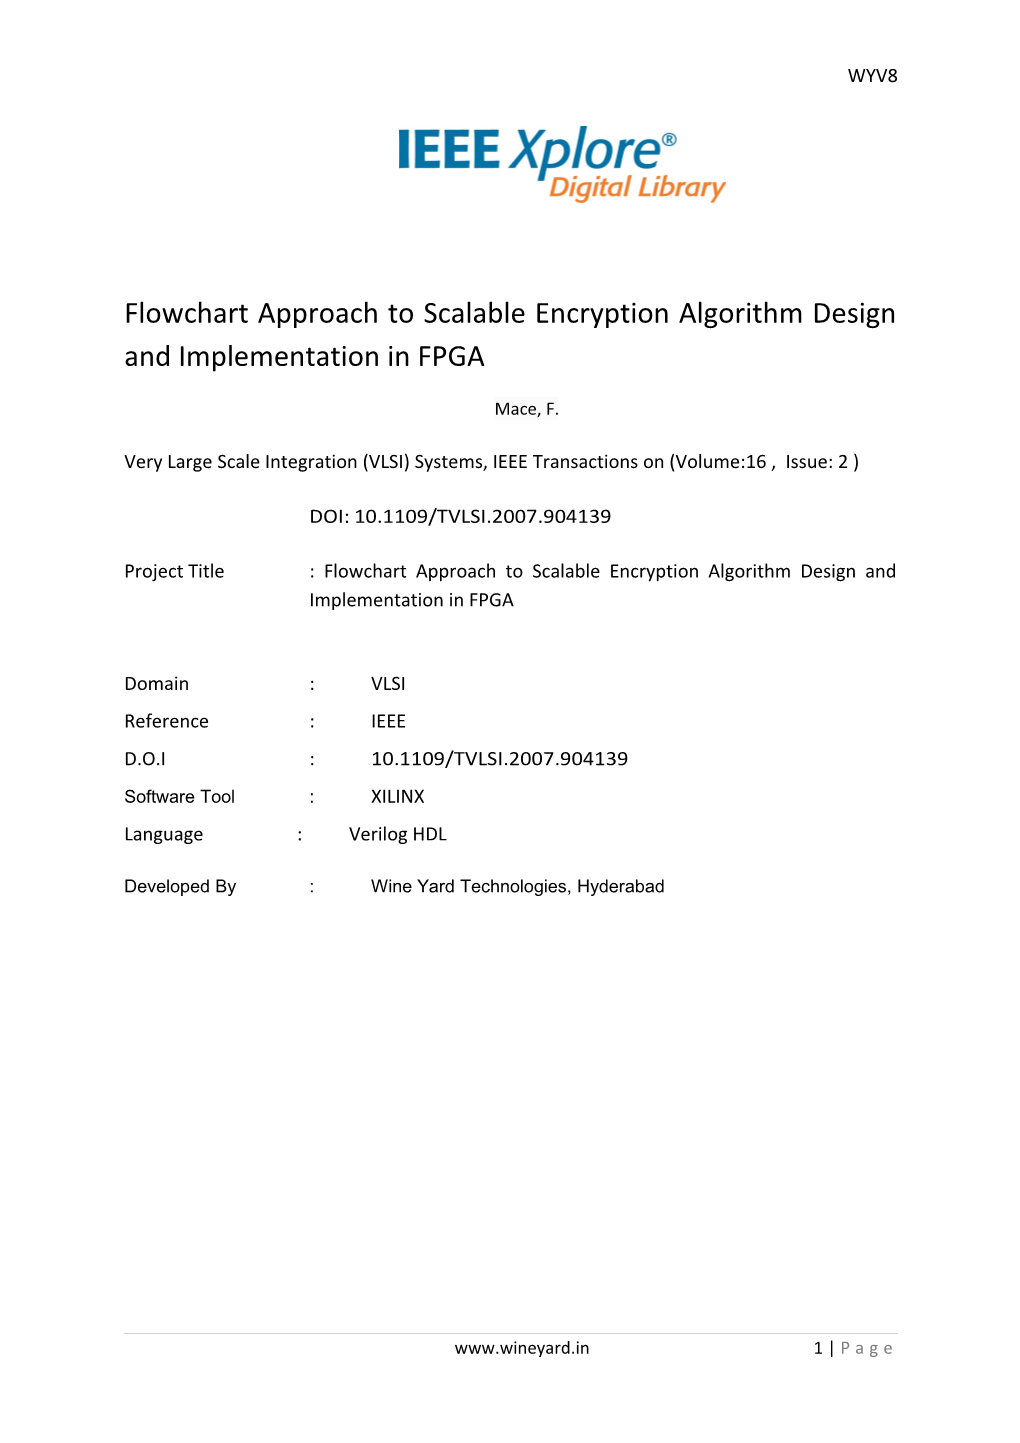 Flowchart Approach to Scalable Encryption Algorithm Design and Implementation in FPGA